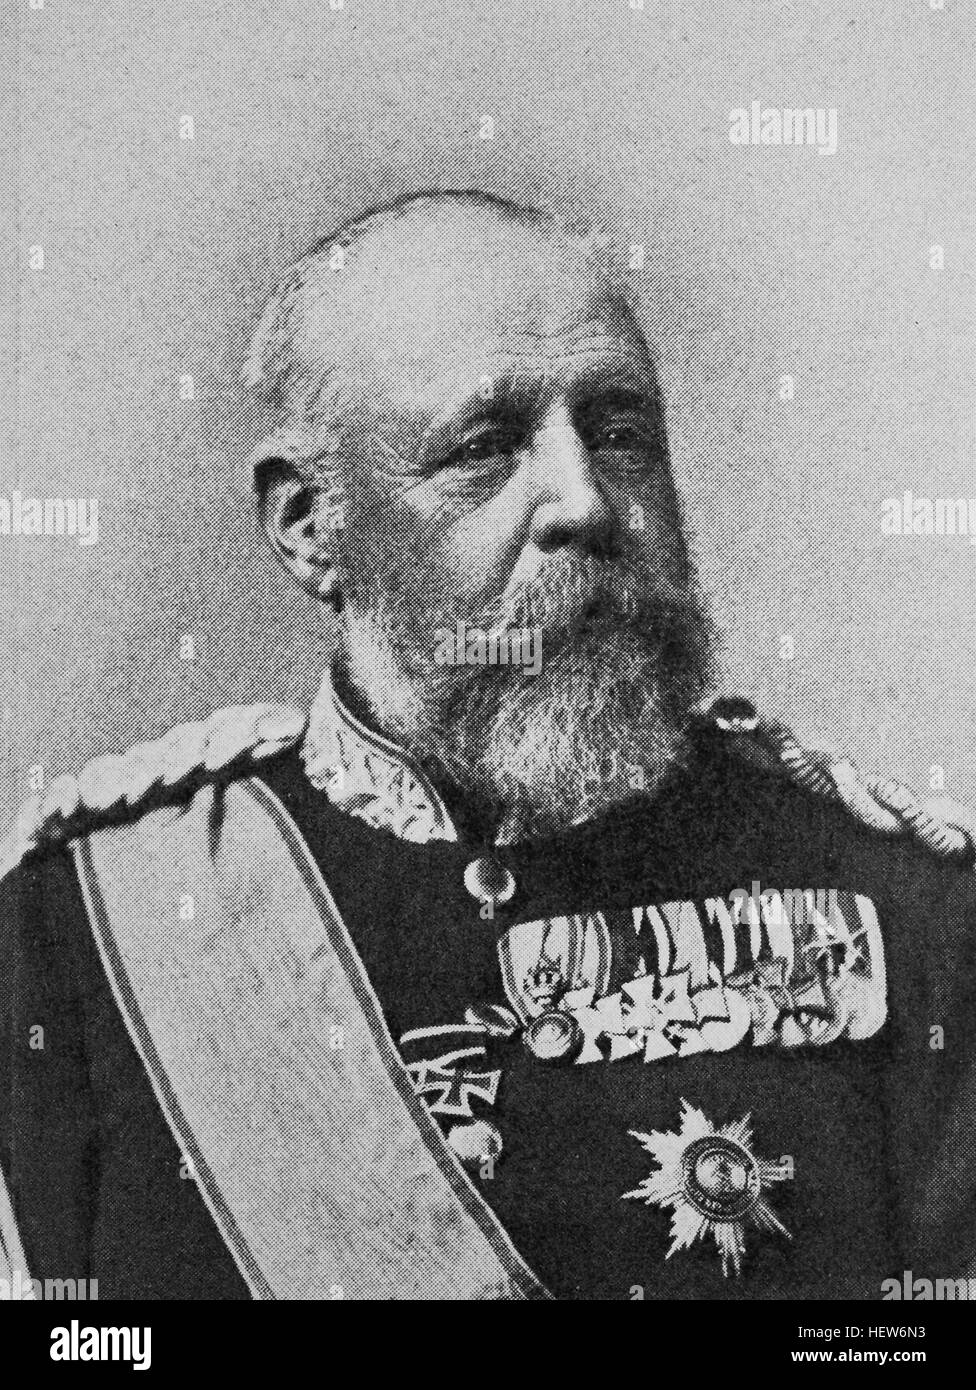 Peter II, Grand Duke of Oldenburg, Nikolaus Friedrich Peter, 8 July 1827-13 June 1900, Grand Duke of Oldenburg from 1853 to 1900, picture from 1895, digital improved Stock Photo